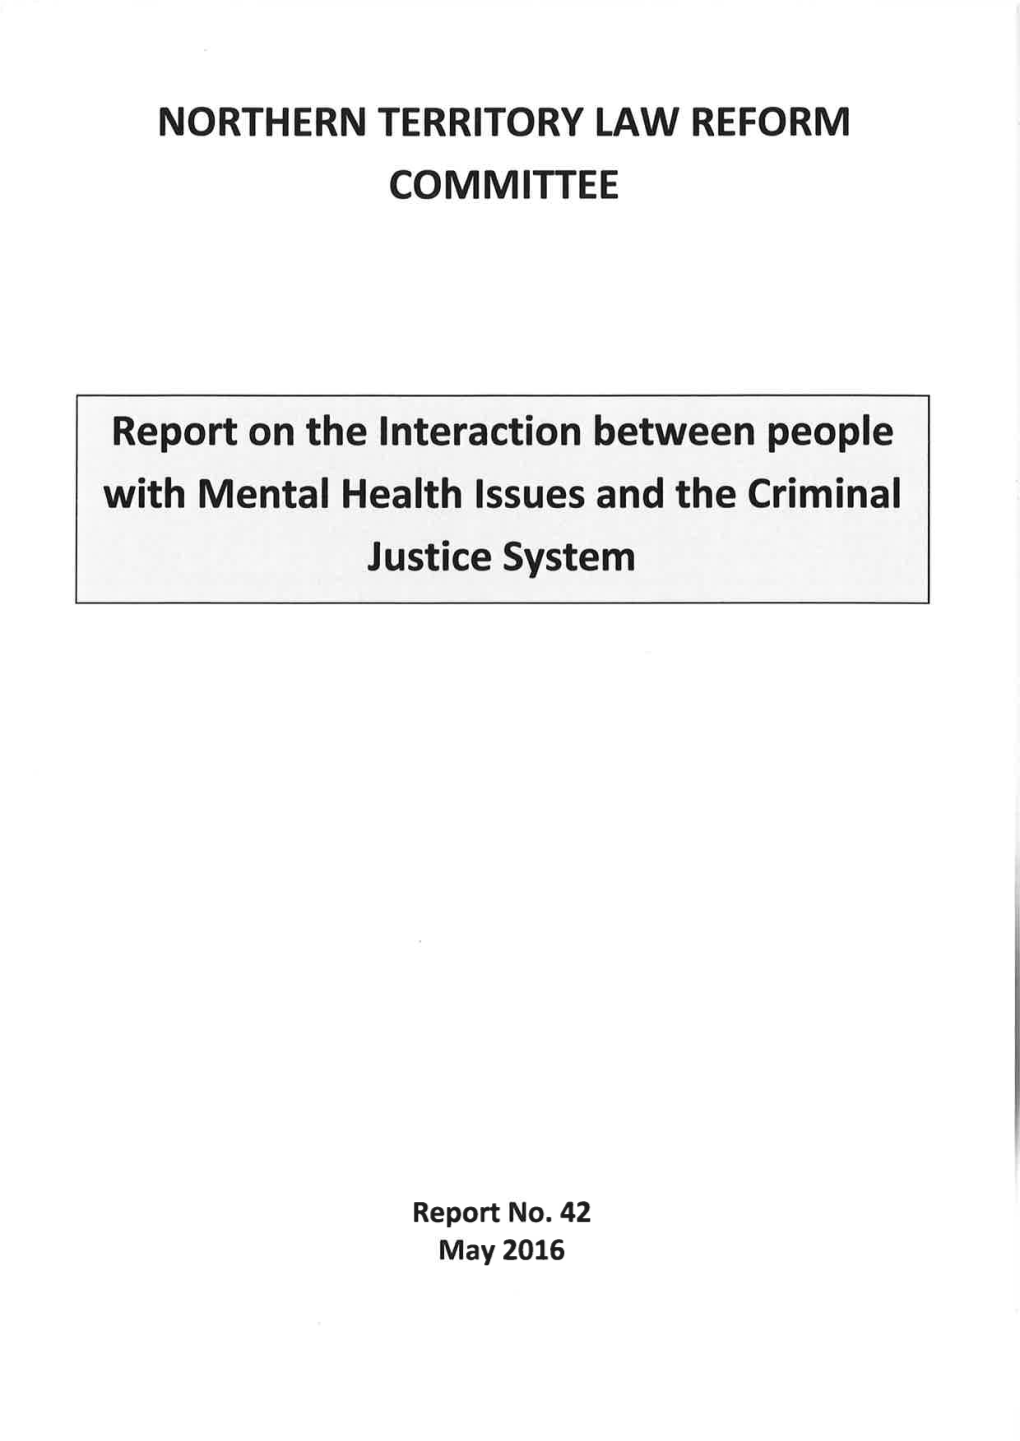 Report on the Interaction Between People with Mental Health Issues